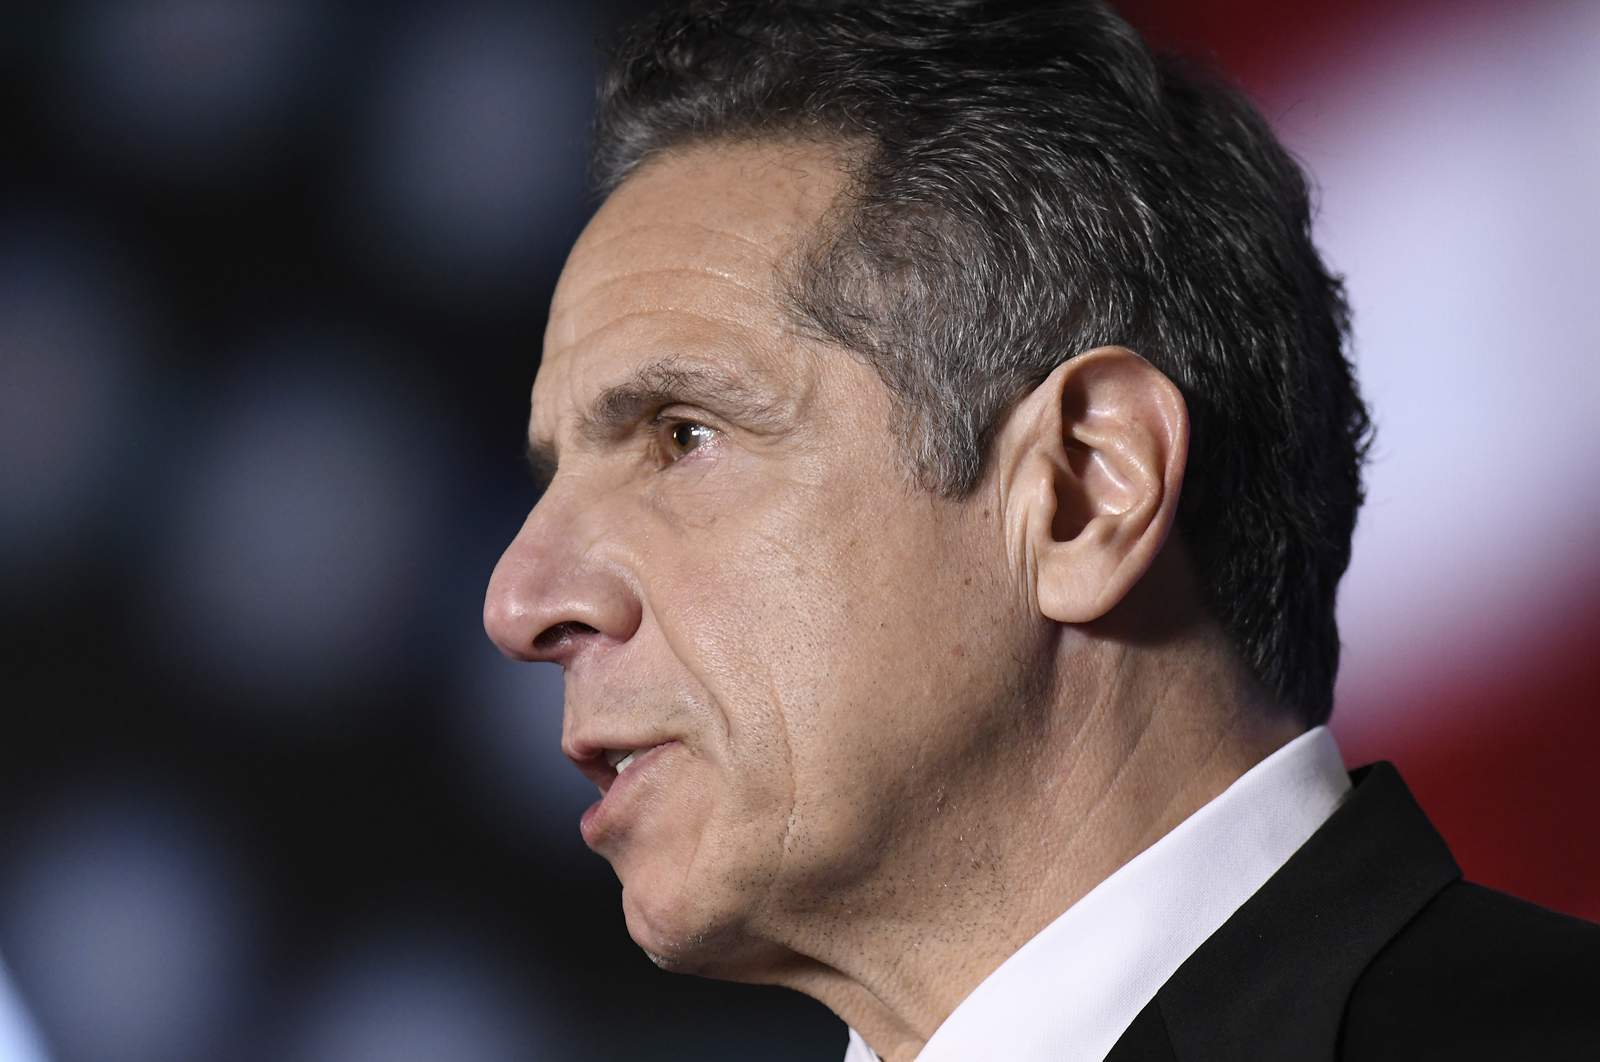 Cuomo sorry for remarks aide 'misinterpreted' as harassment